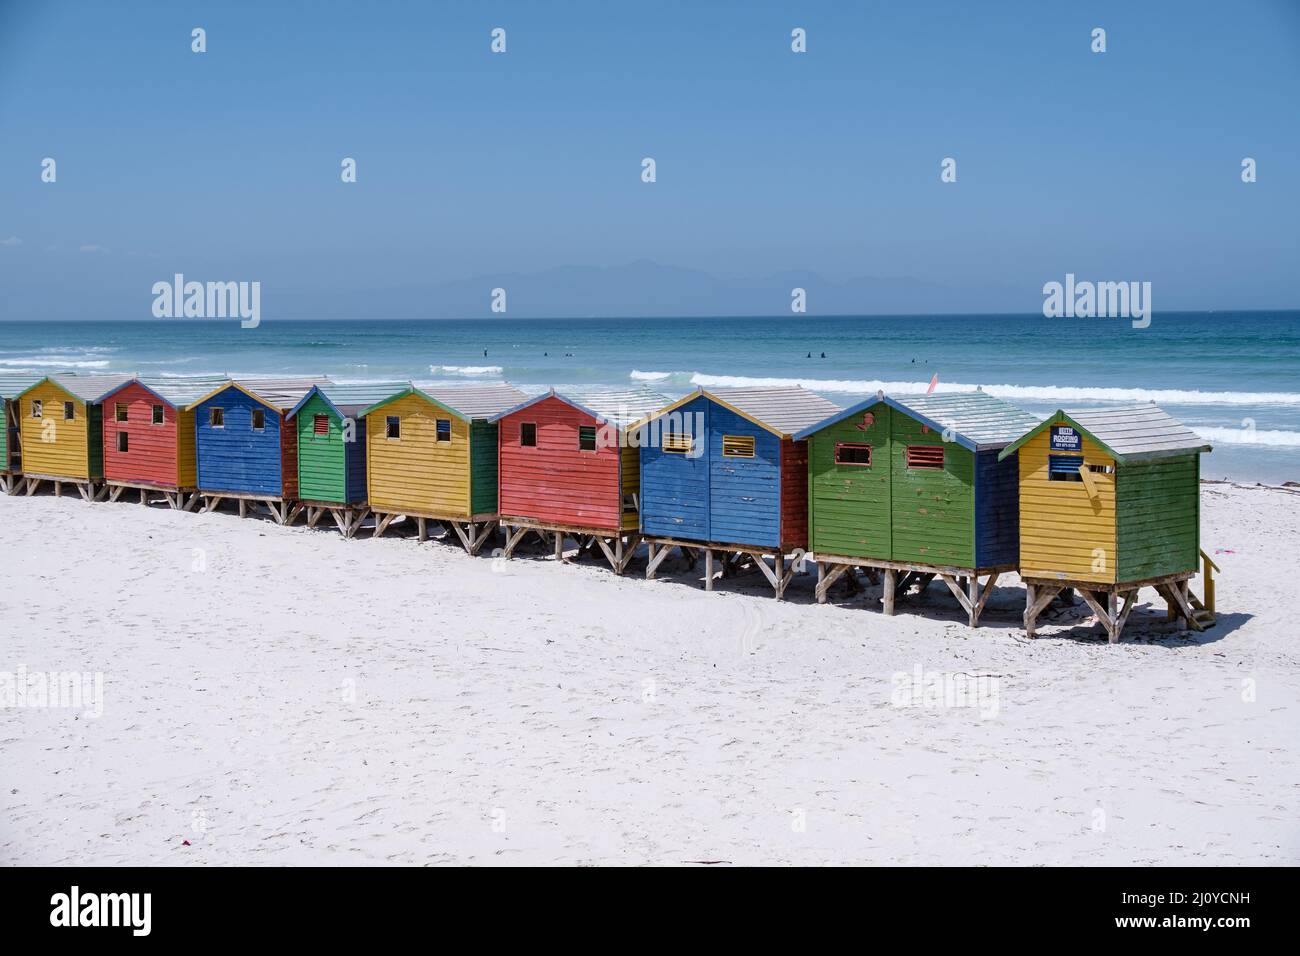 Colorful beach house at Muizenberg beach Cape Town,beach huts, Muizenberg, Cape Town, False Bay, South Africa Stock Photo